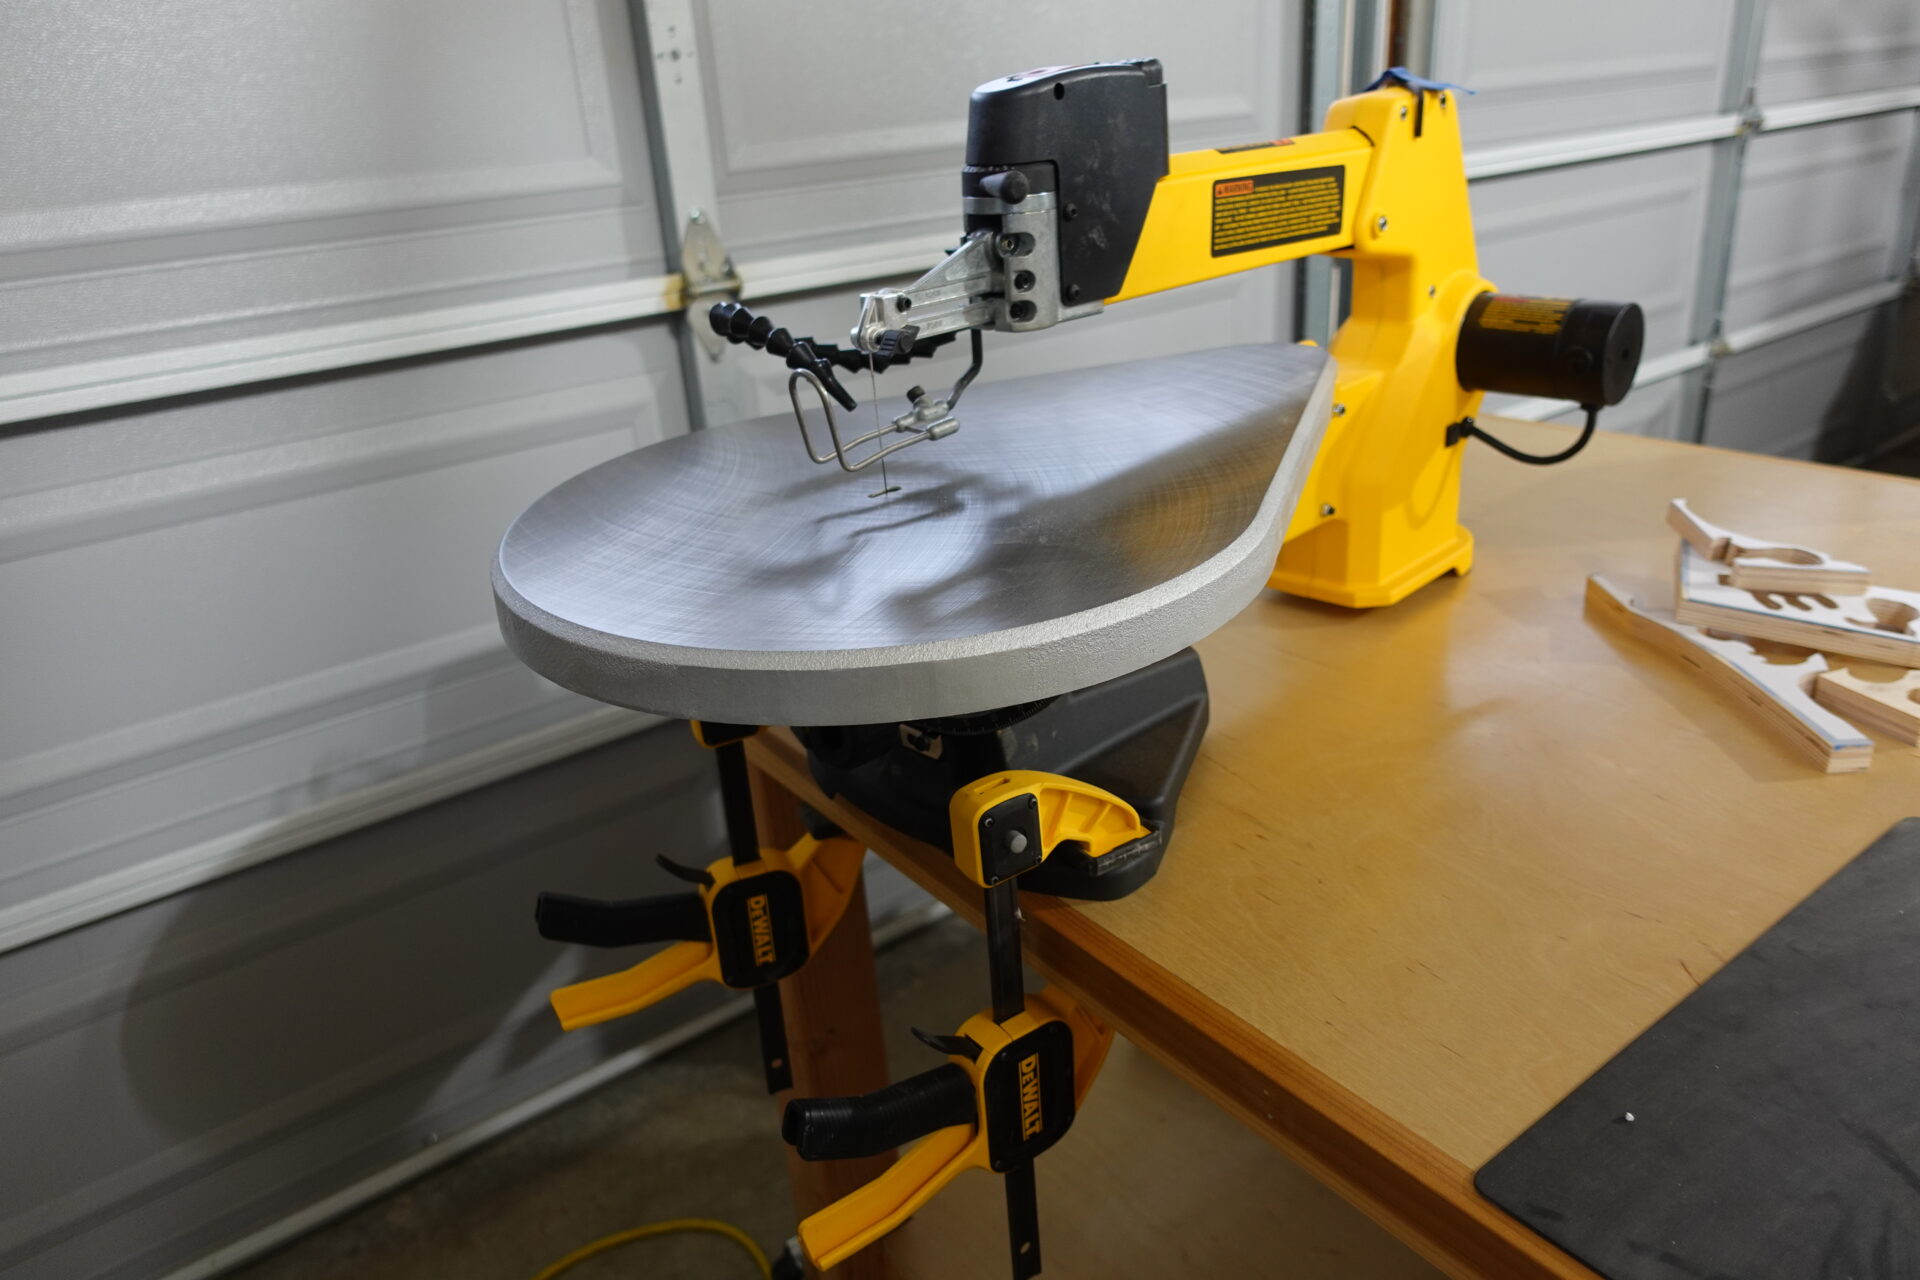 The Dewalt DW788 clamped to the workbench